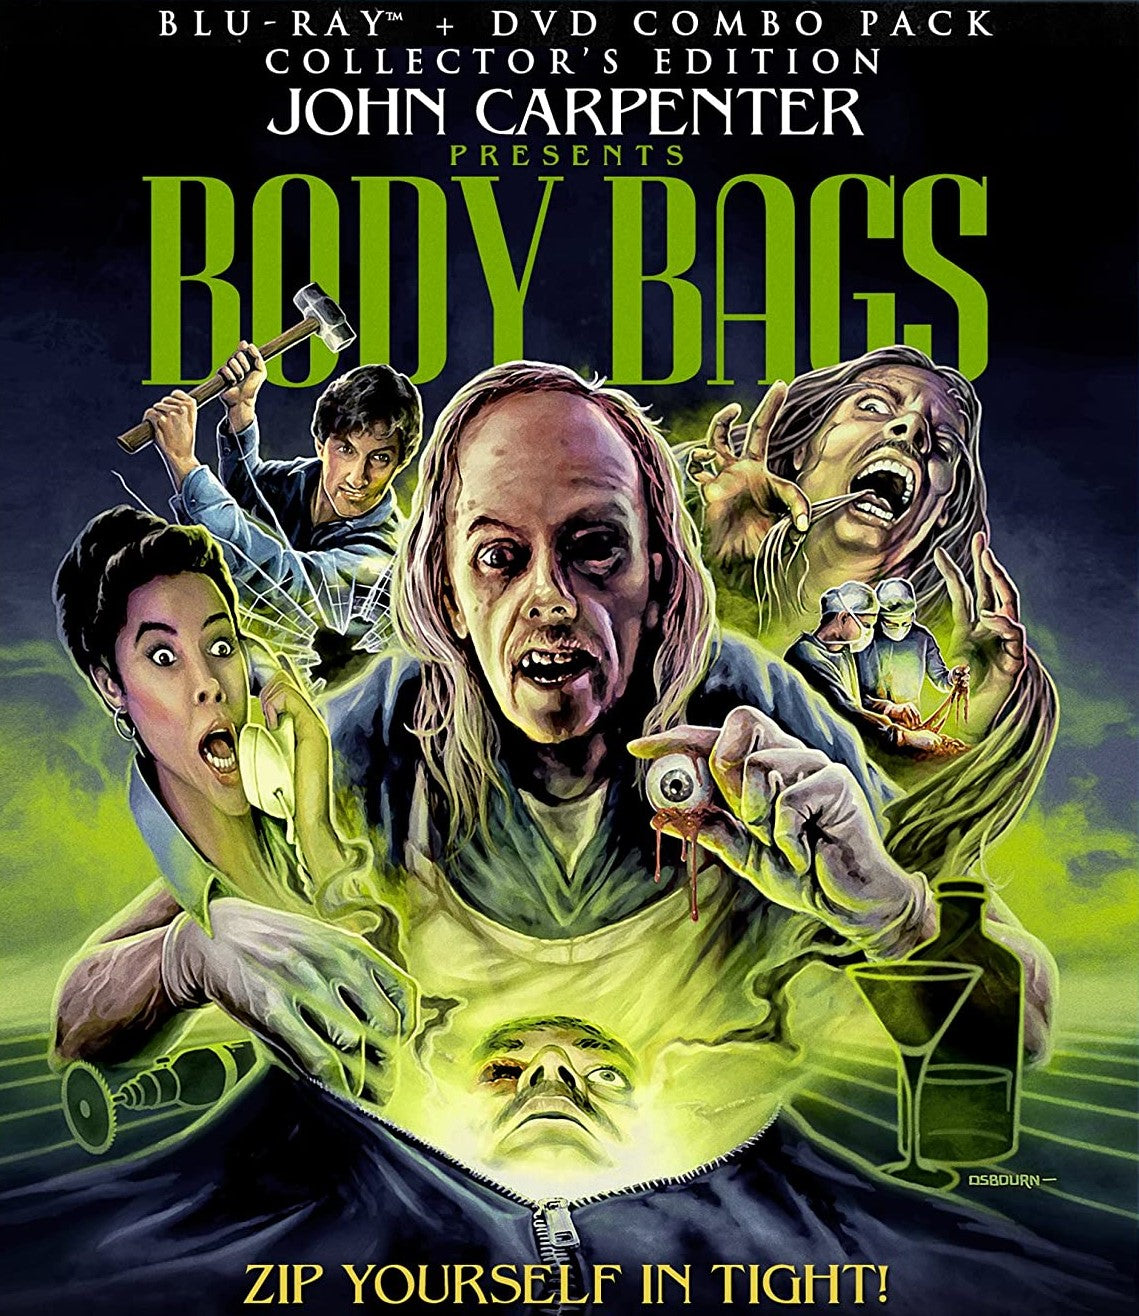 BODY BAGS (COLLECTOR'S EDITION) BLU-RAY/DVD